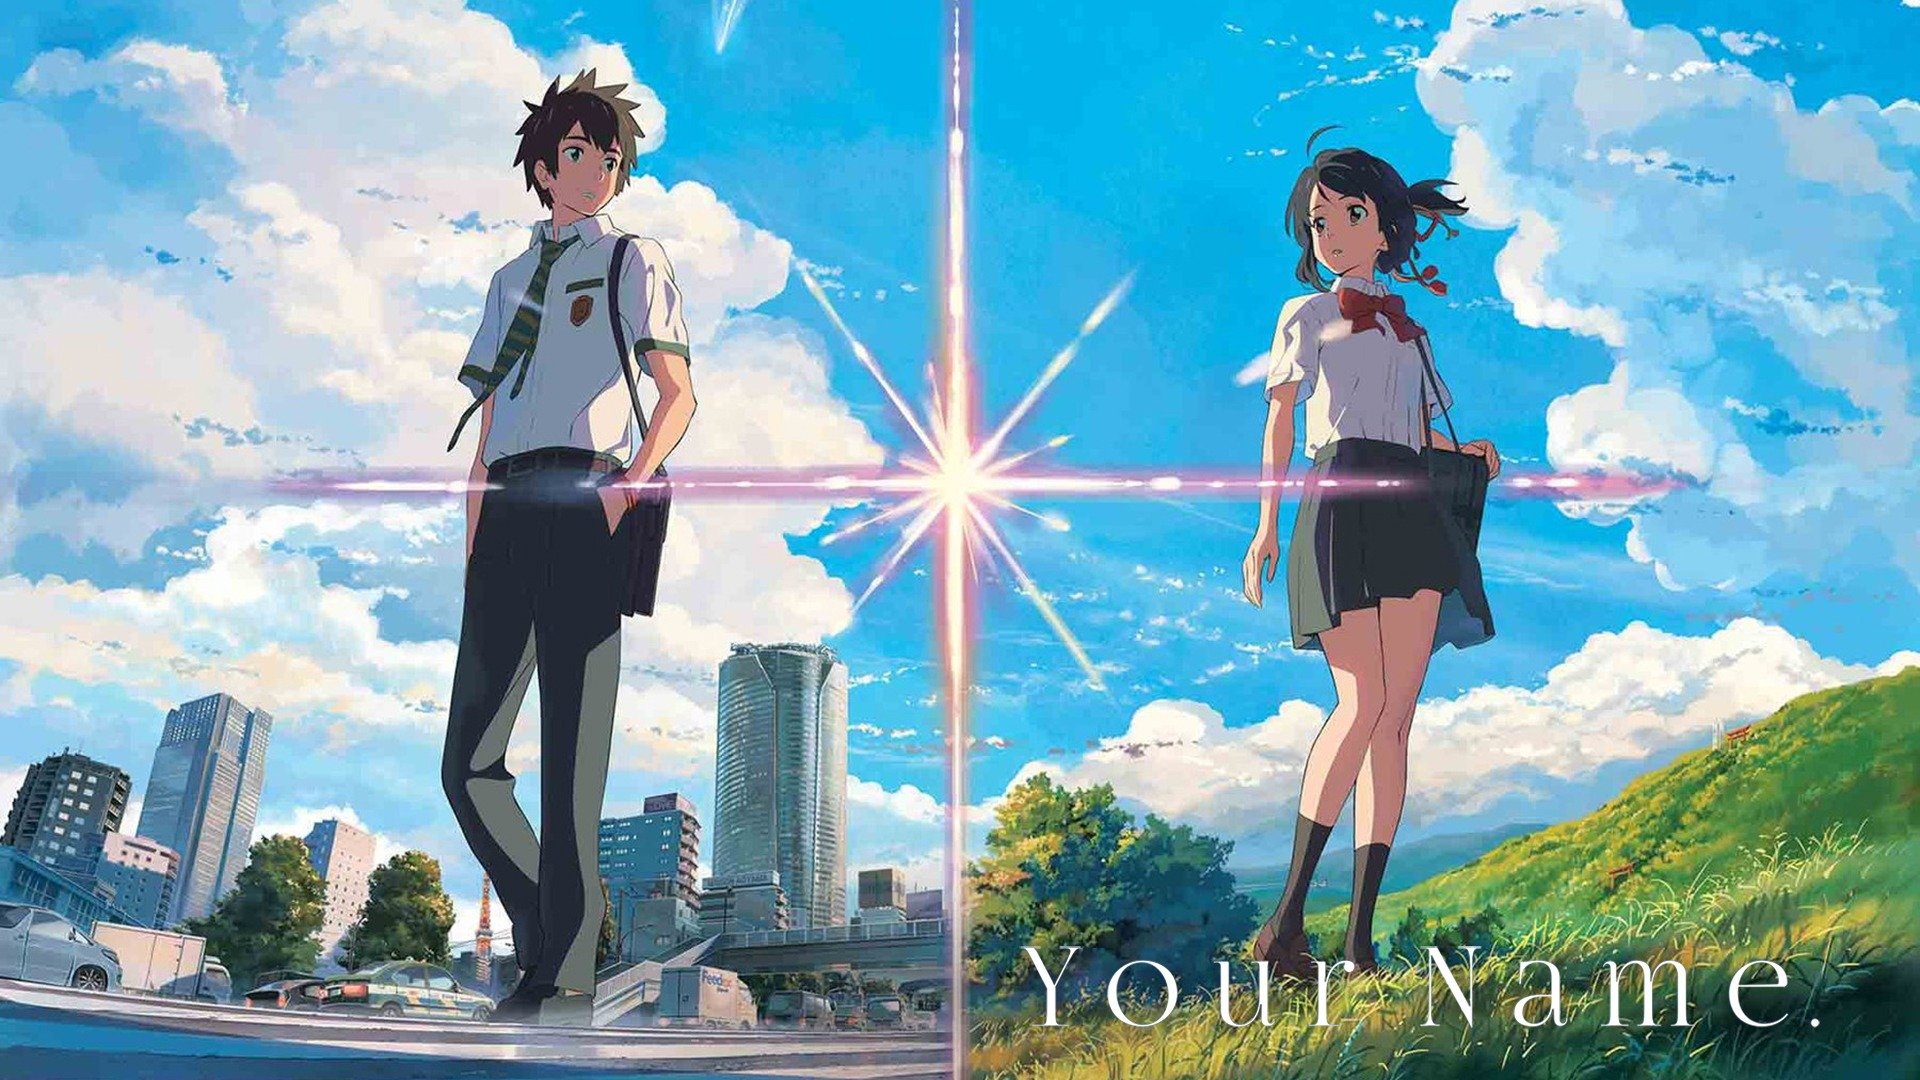 I didn’t set out to be an animation director at first – “Your Name” director Makoto Shinkai reveals that audiences are what shaped him into who he is